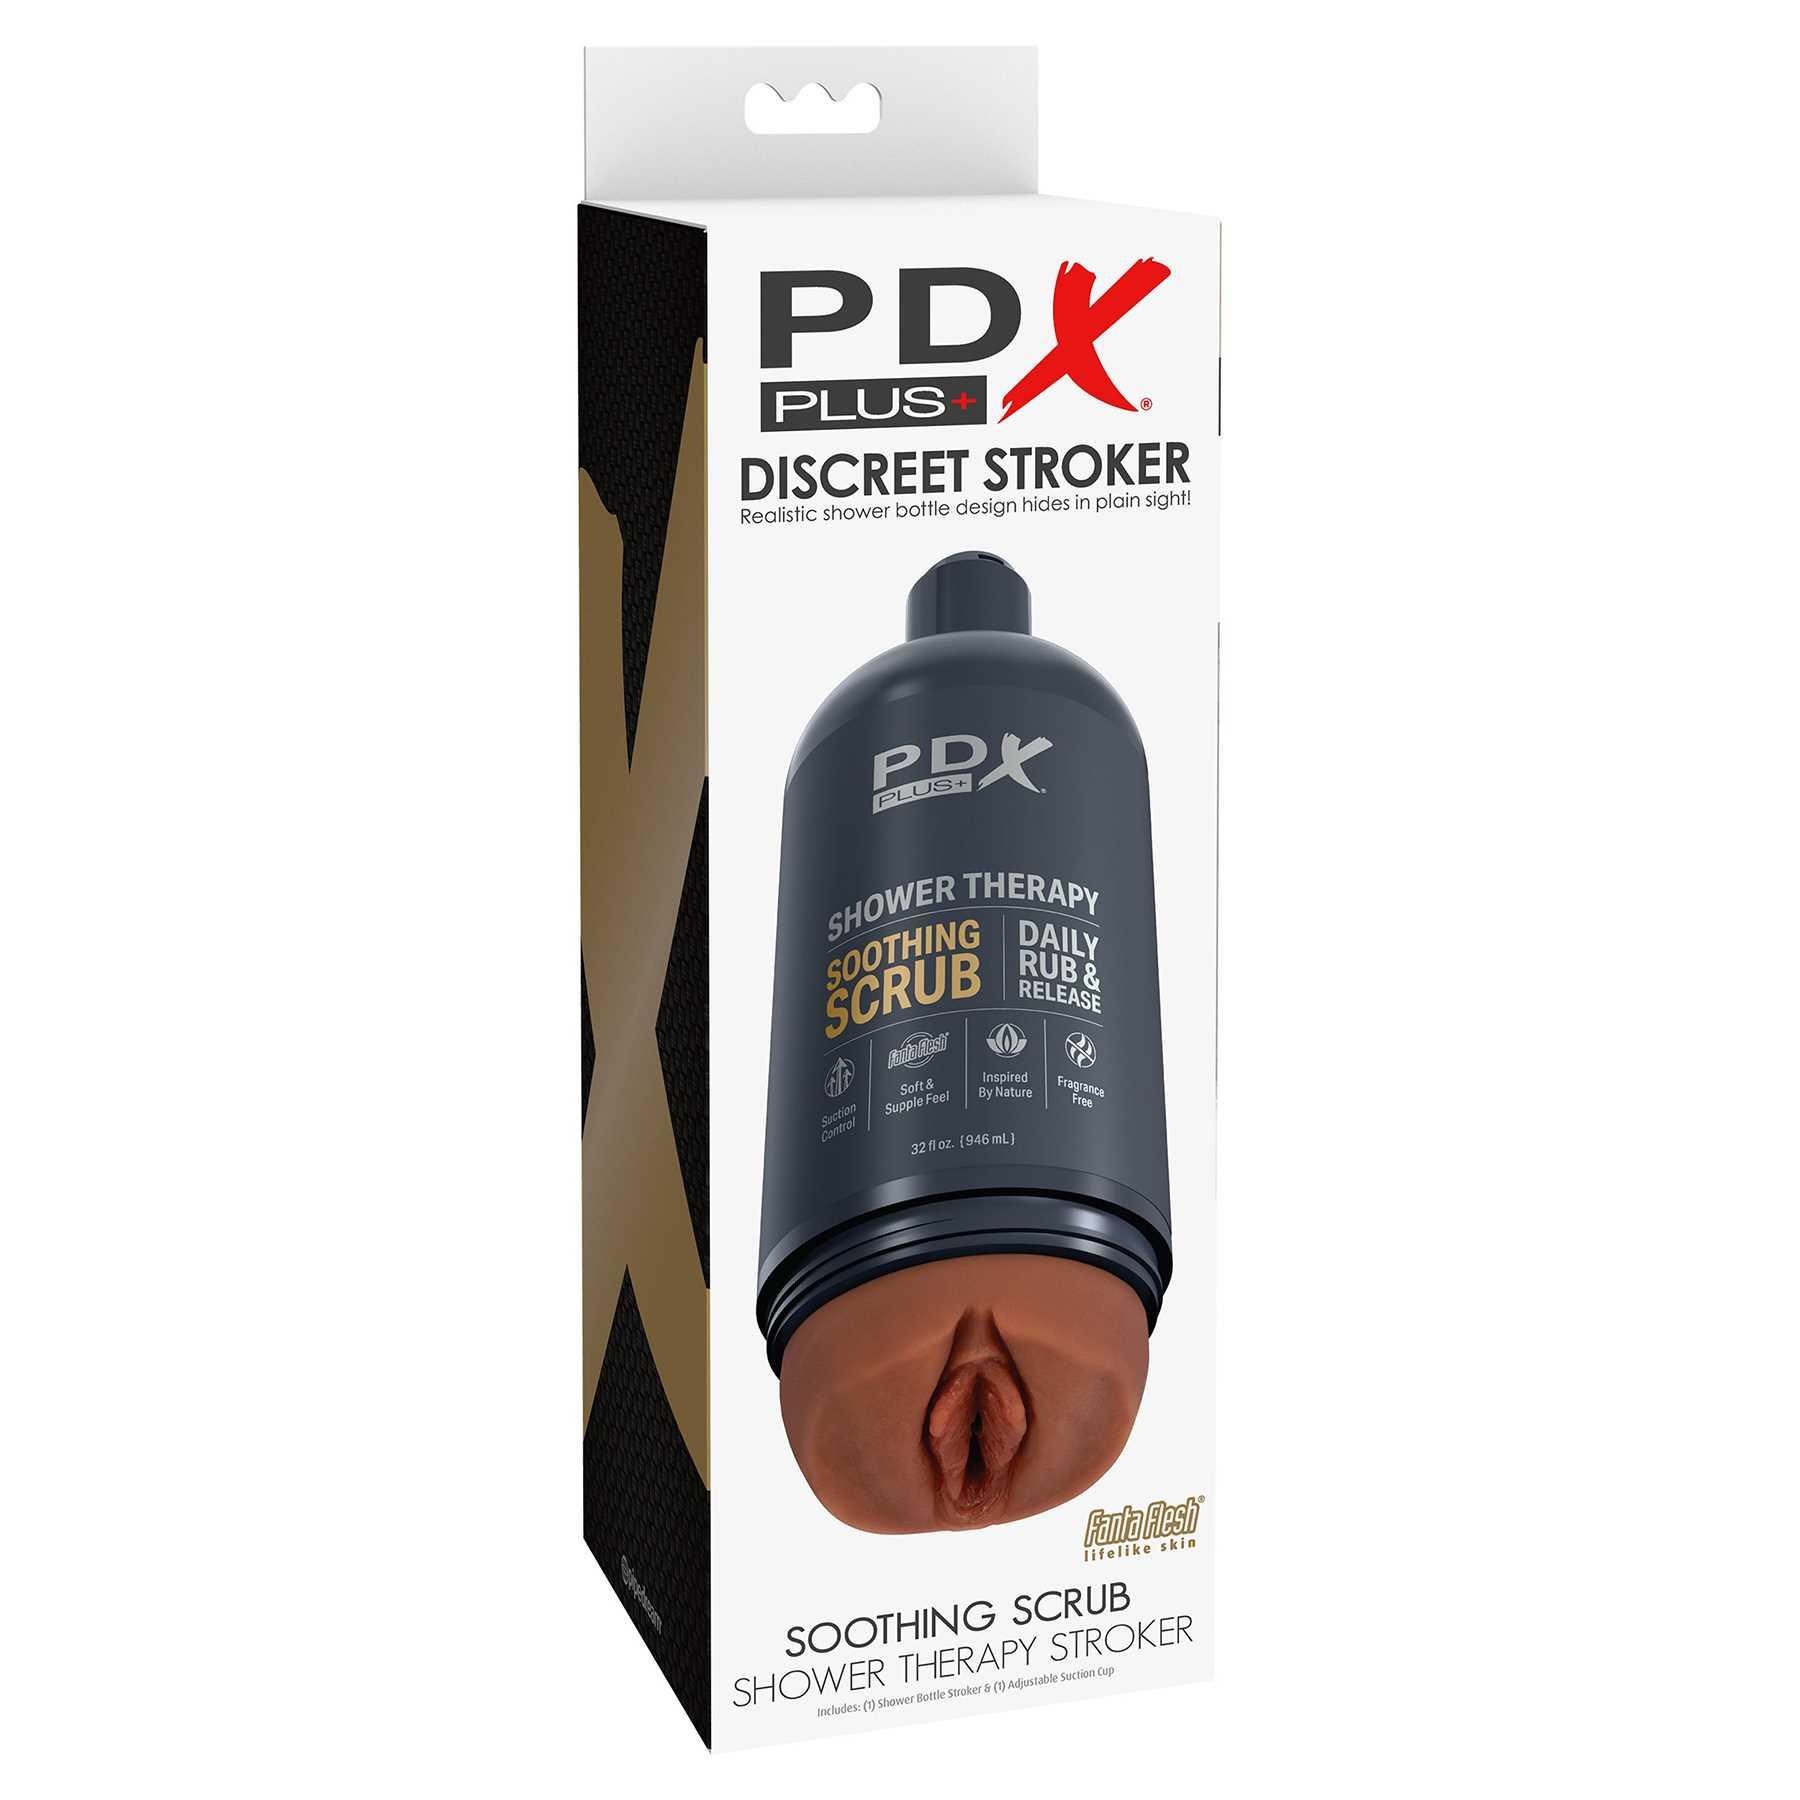 PDX Plus Shower Therapy Soothing Scrub Discreet Stroker male masturbator package